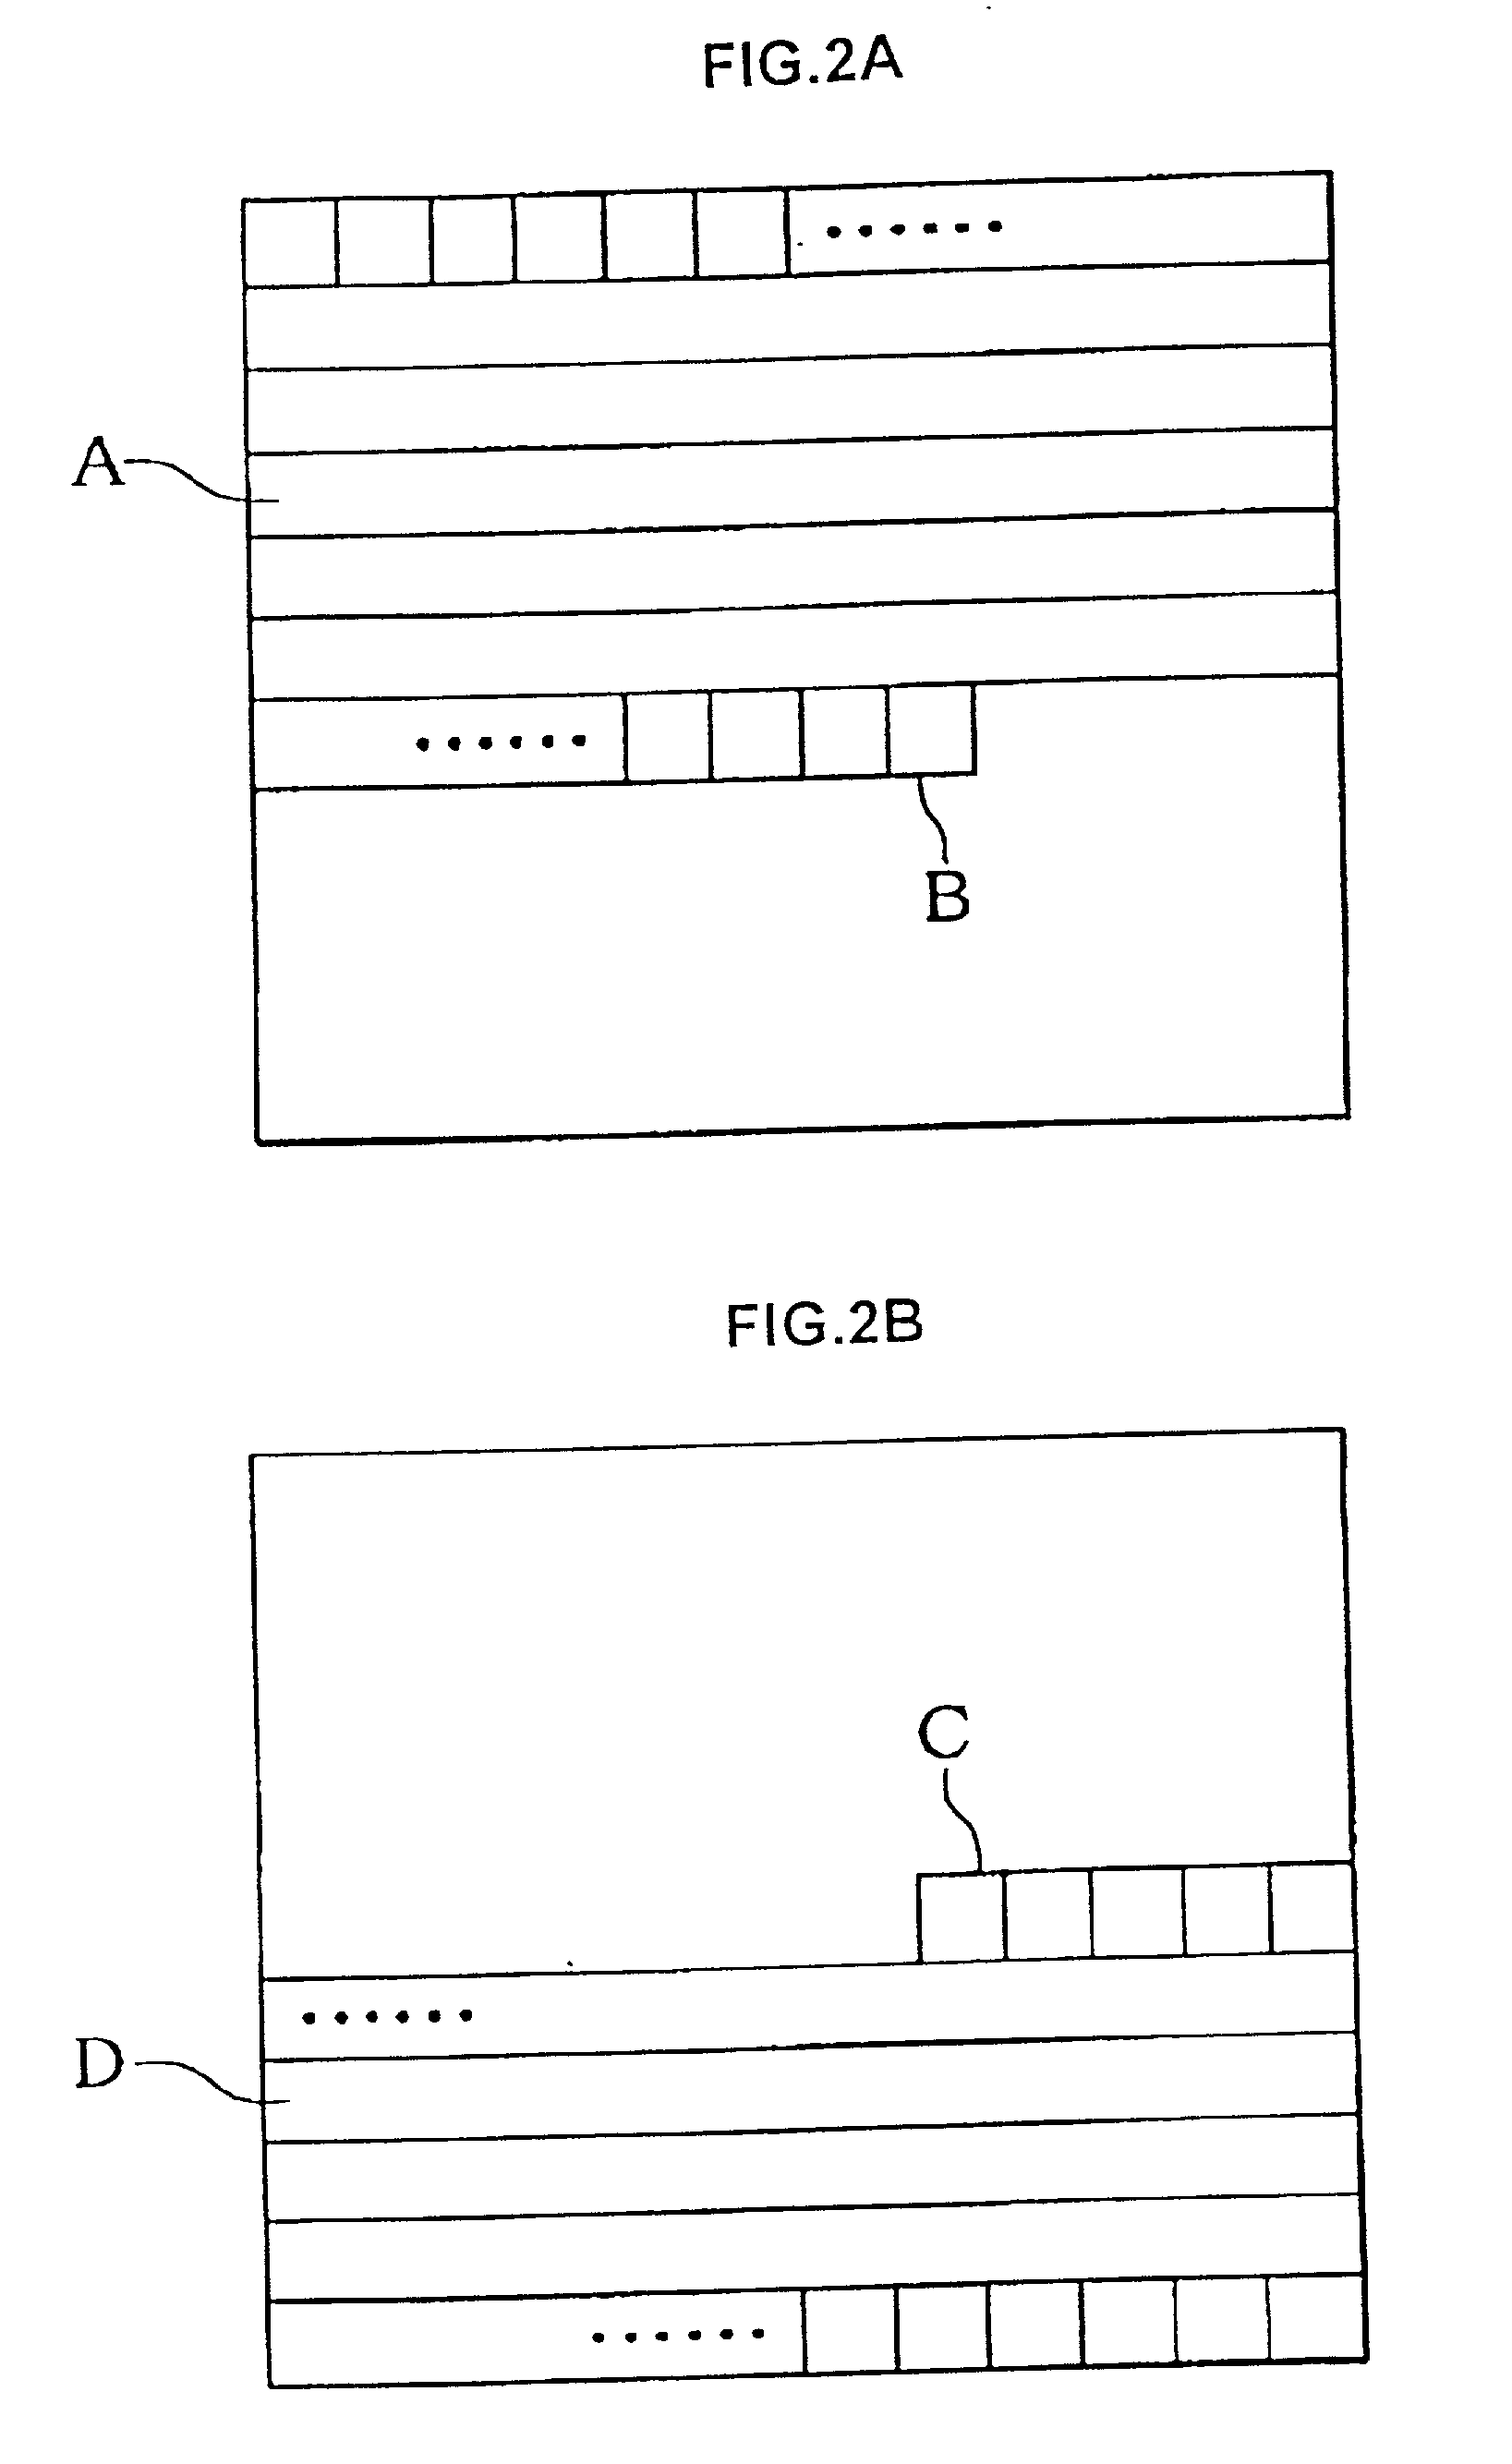 Apparatus and method for transferring video data